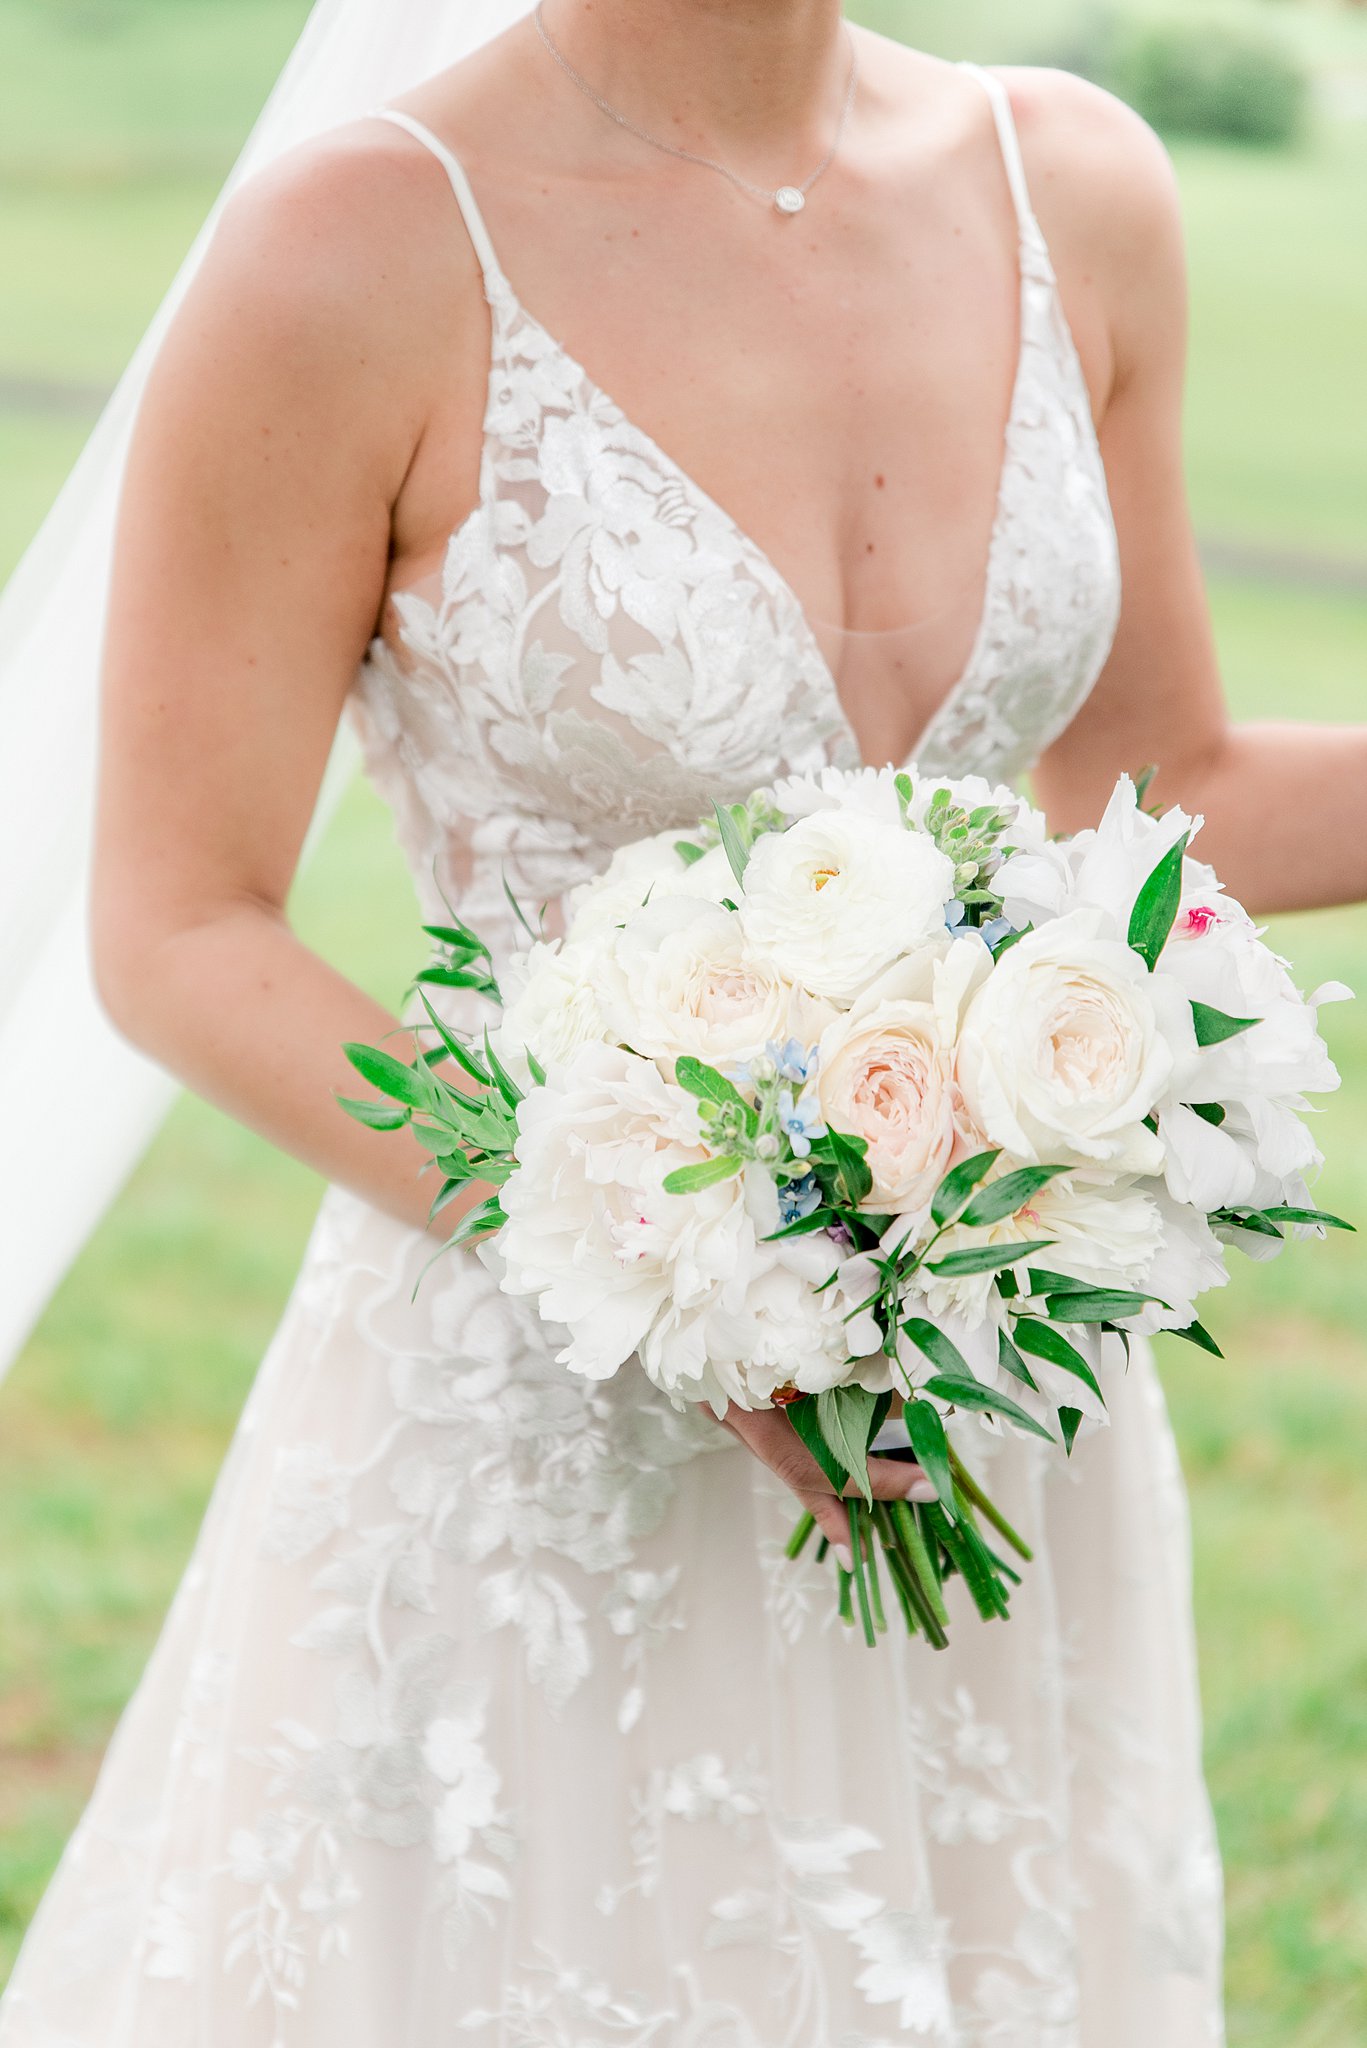 Details of a bride's white and pink bouquet in her hand